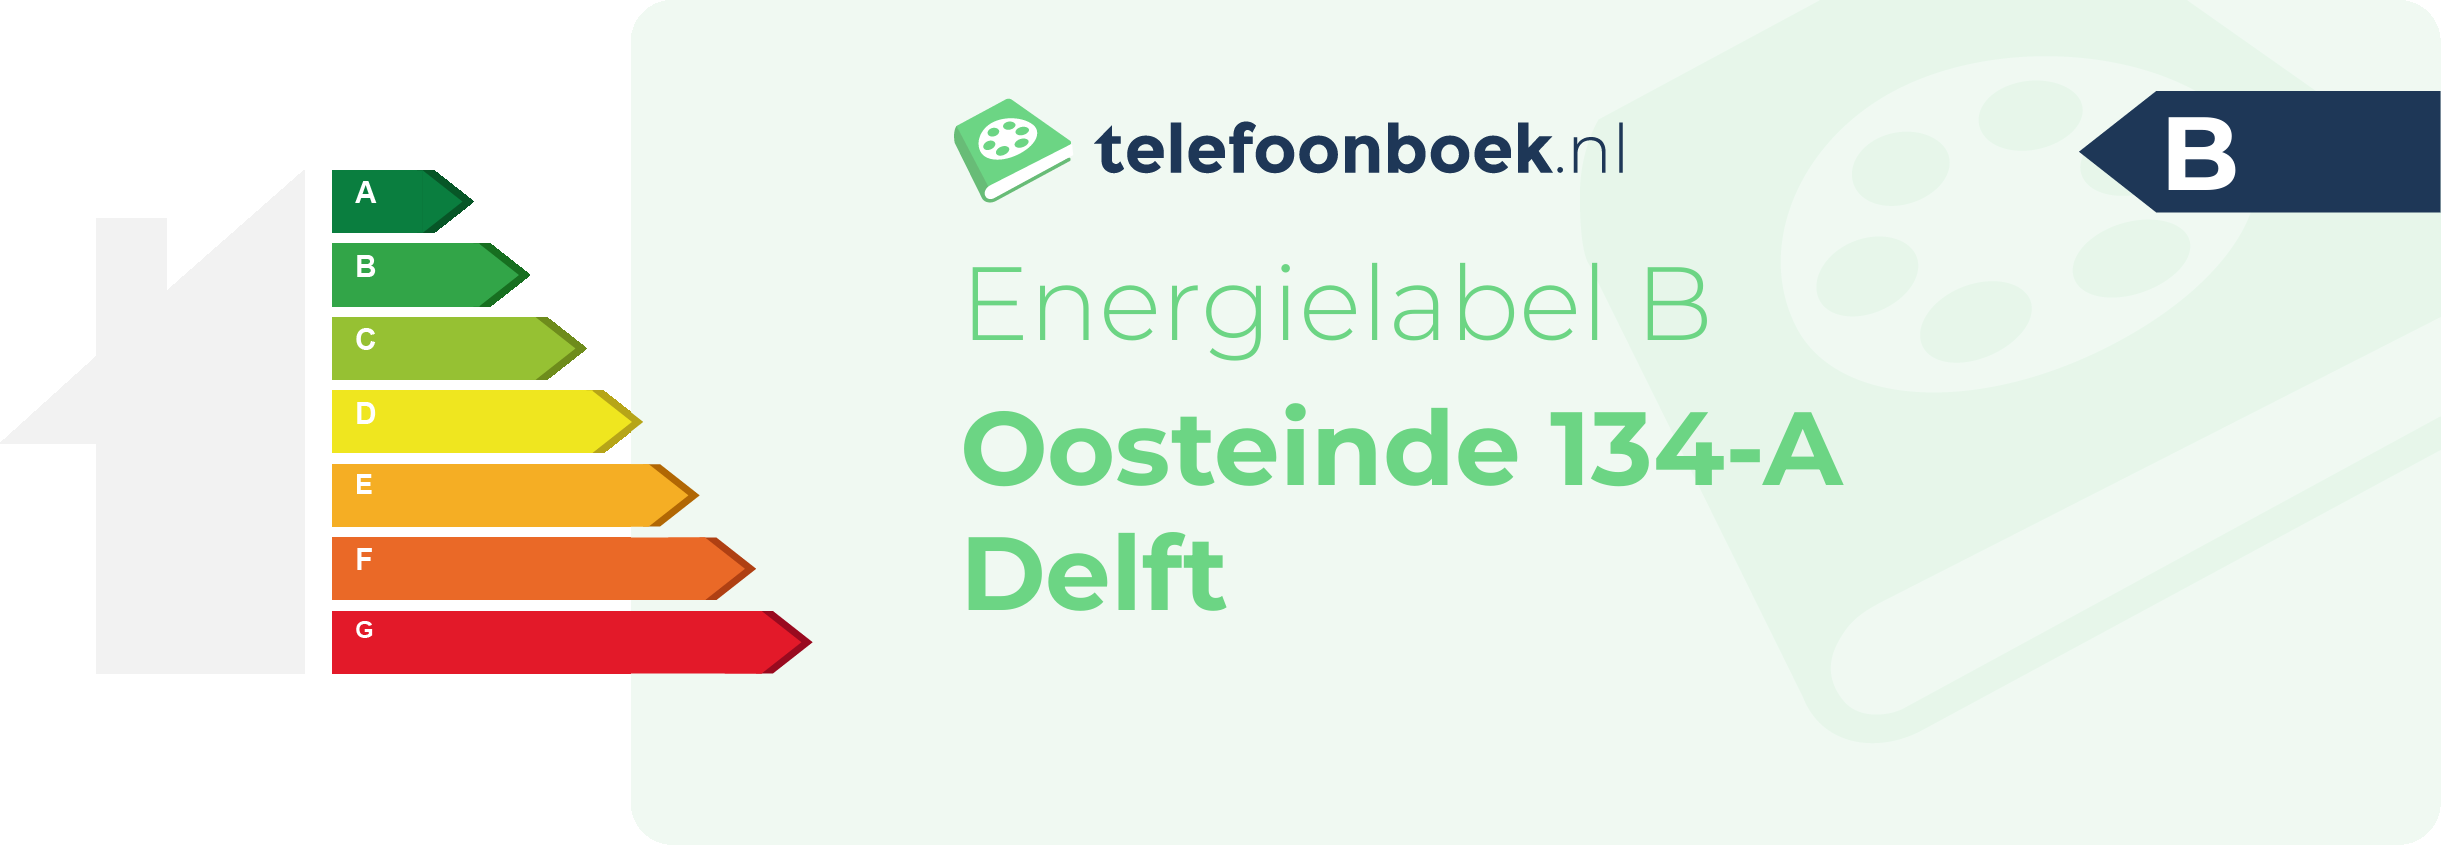 Energielabel Oosteinde 134-A Delft